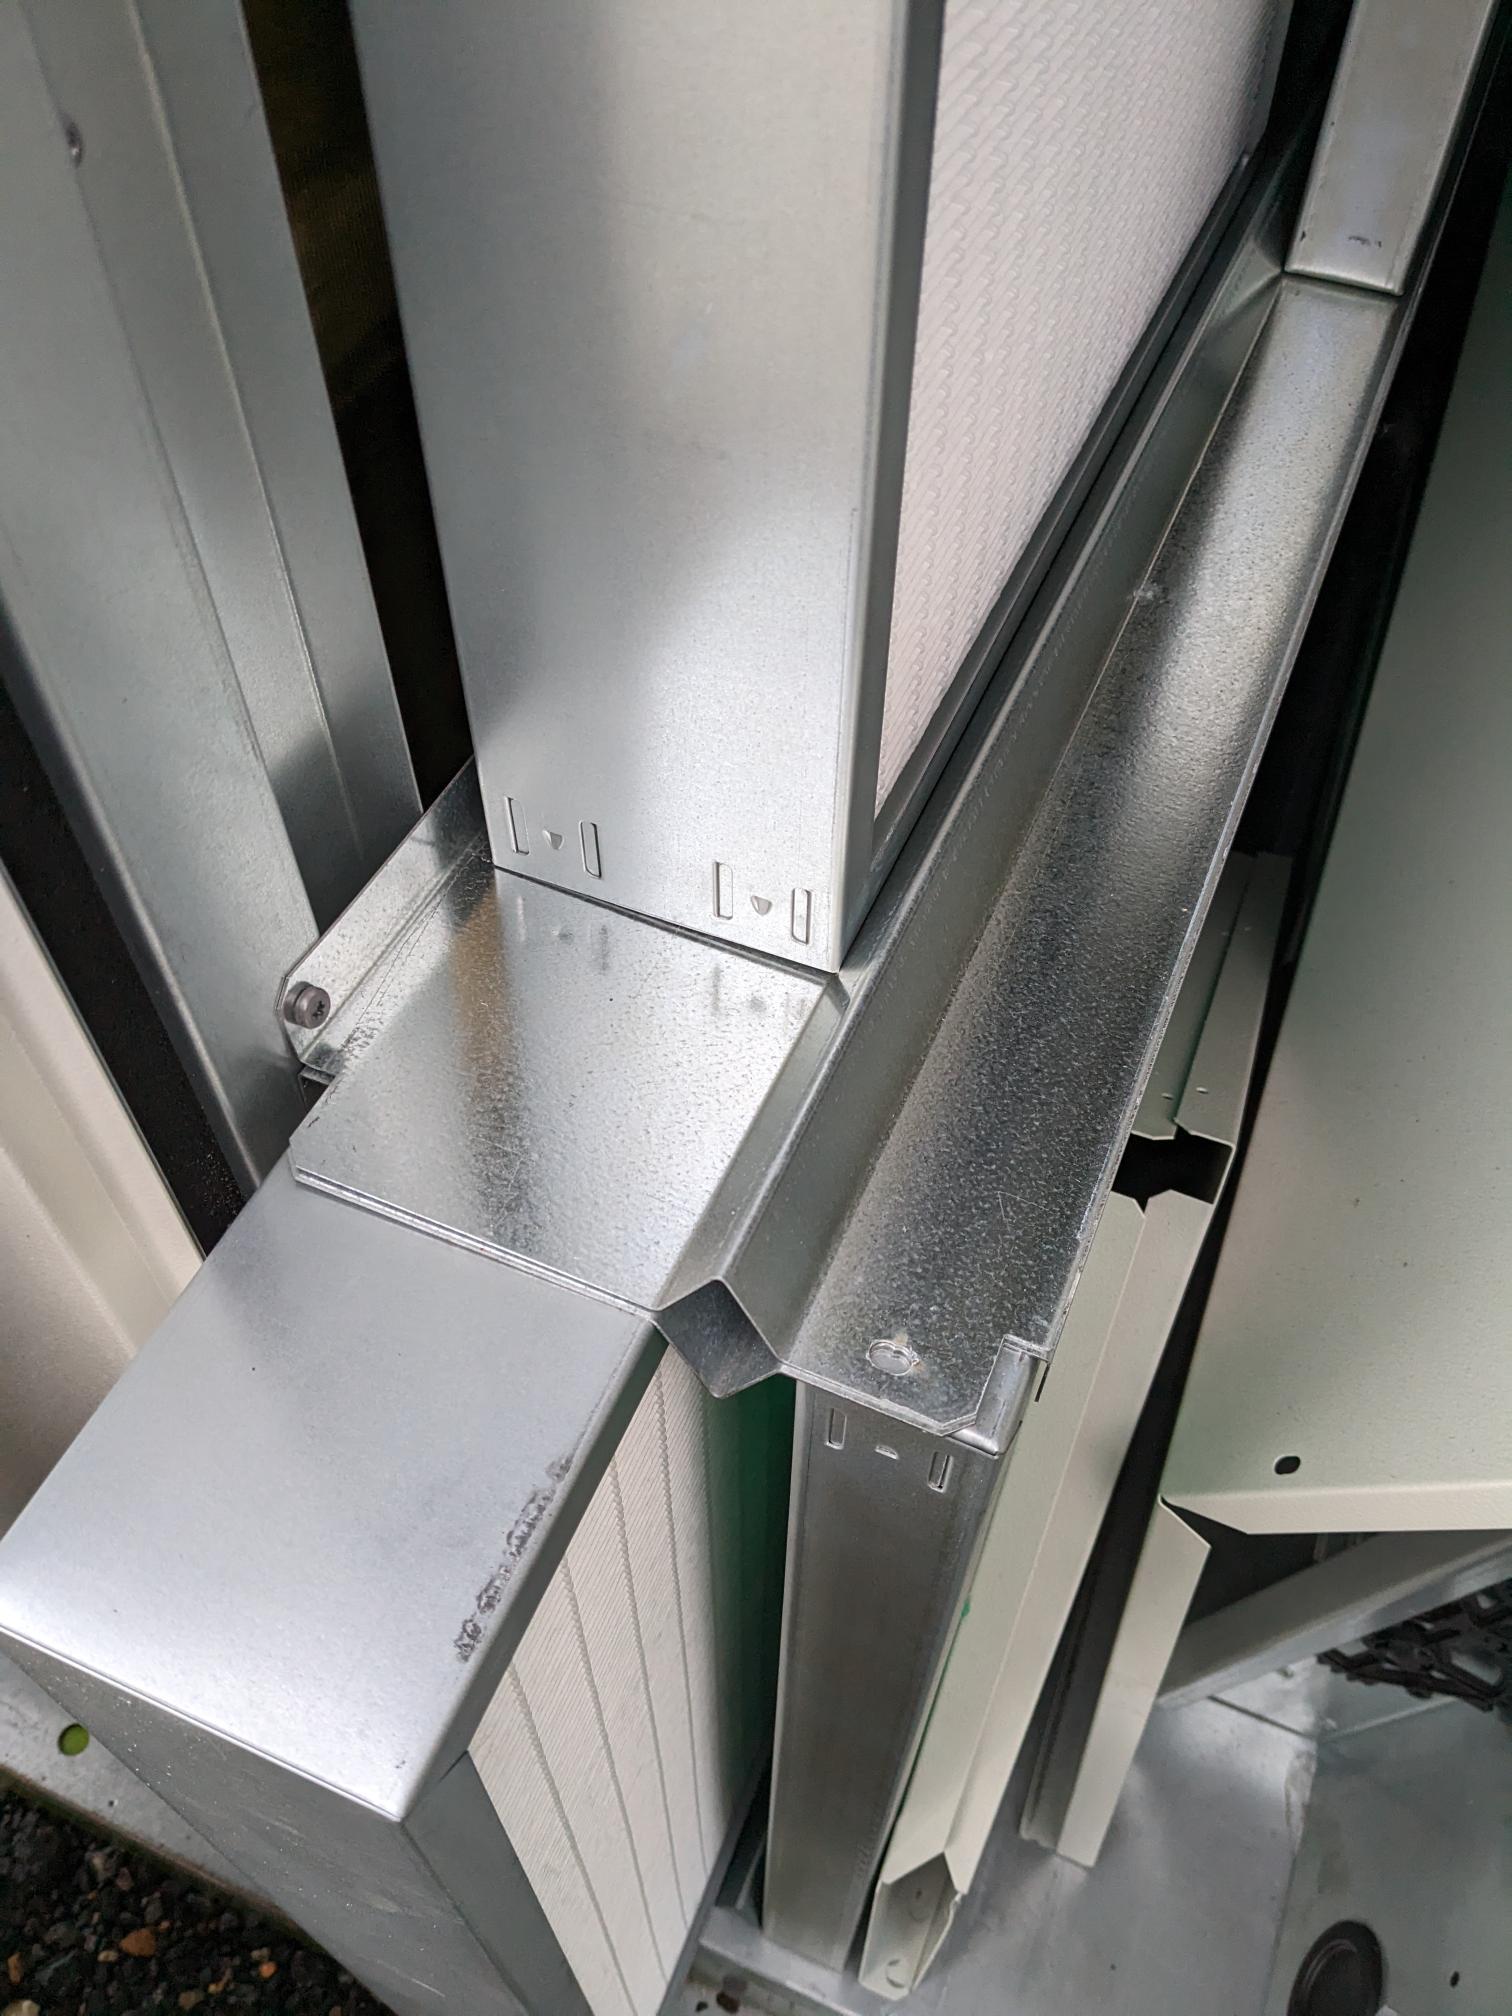 temporary ventilation for hospitals with hepa filtration for safe operation